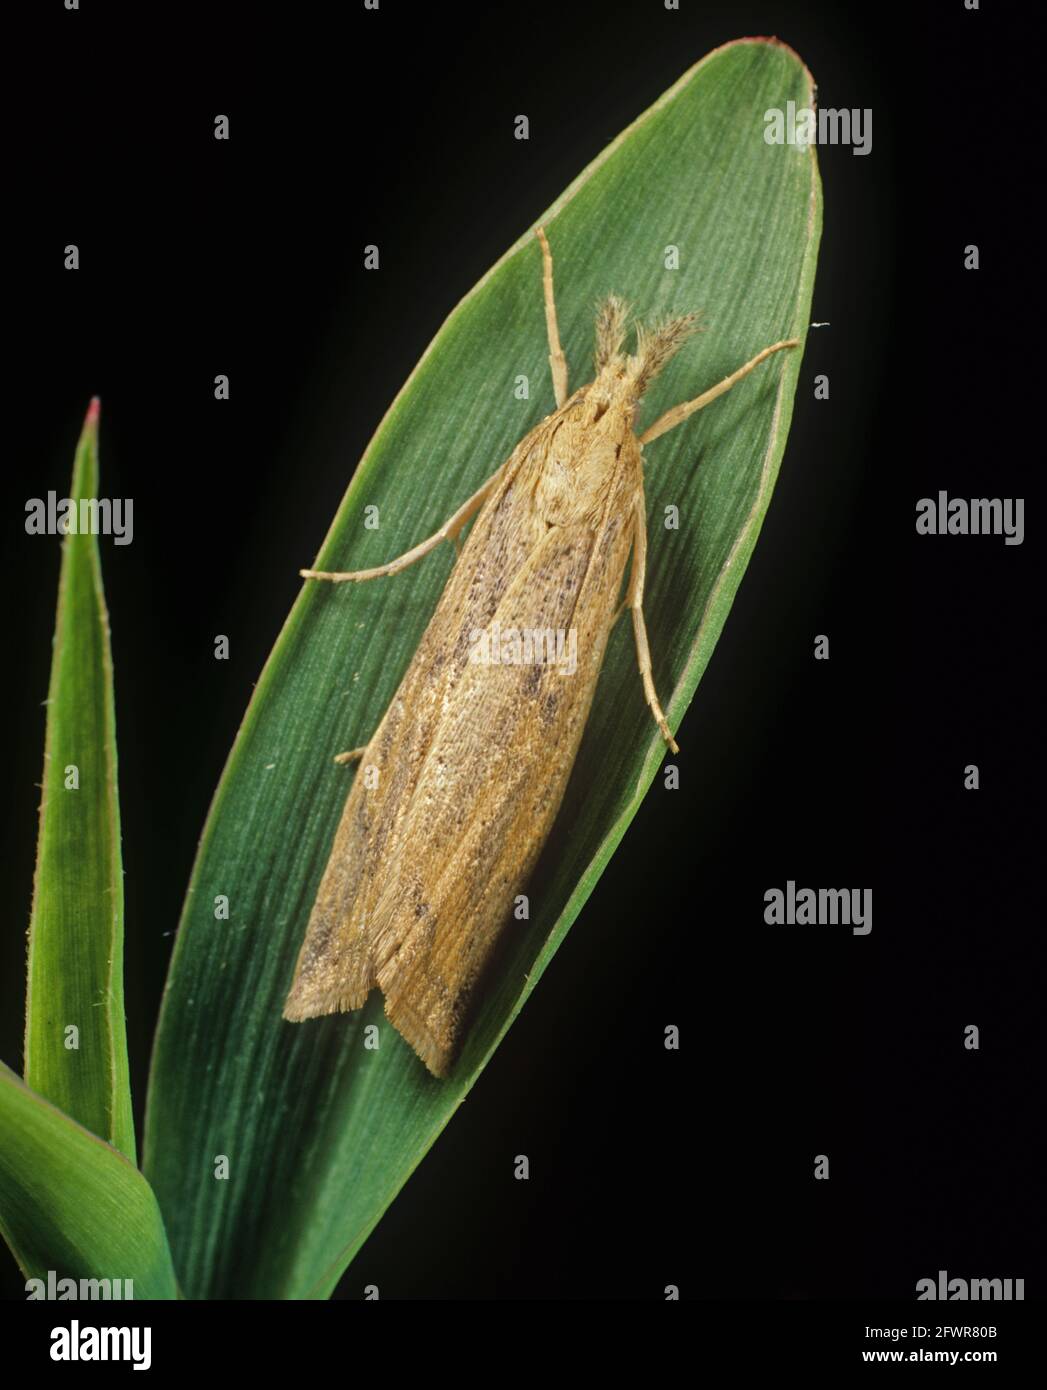 Spotted stalk borer (Chilo partellus) adult moth on maize or corn leaf, South Africa, February Stock Photo